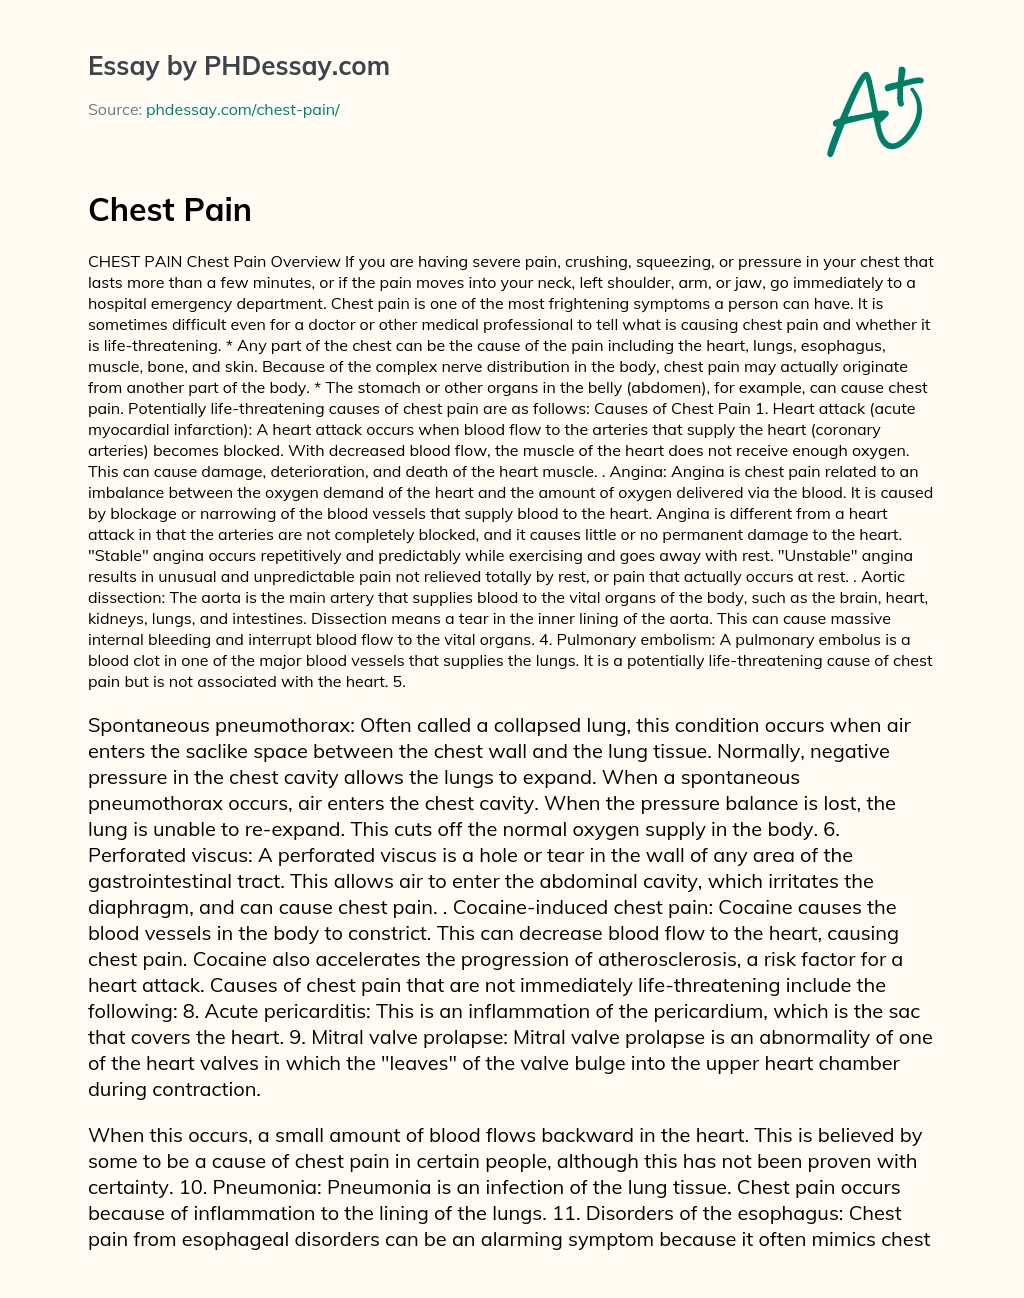 Understanding Chest Pain: Causes and When to Seek Emergency Care essay